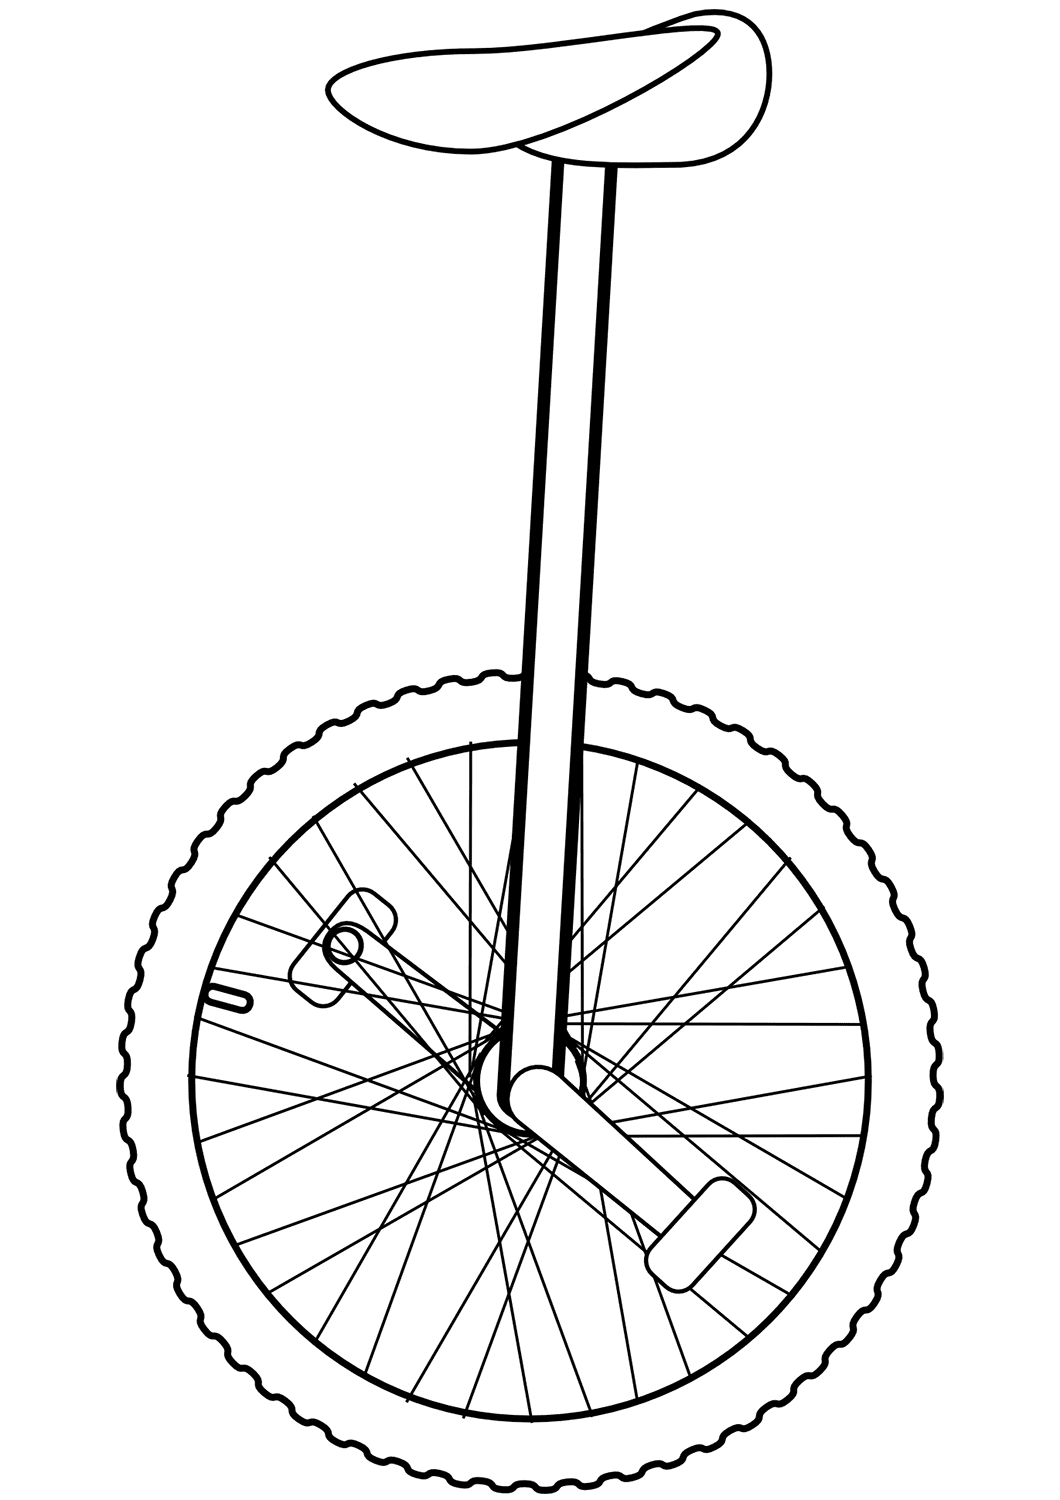 Unicycle Bicycle Coloring Page